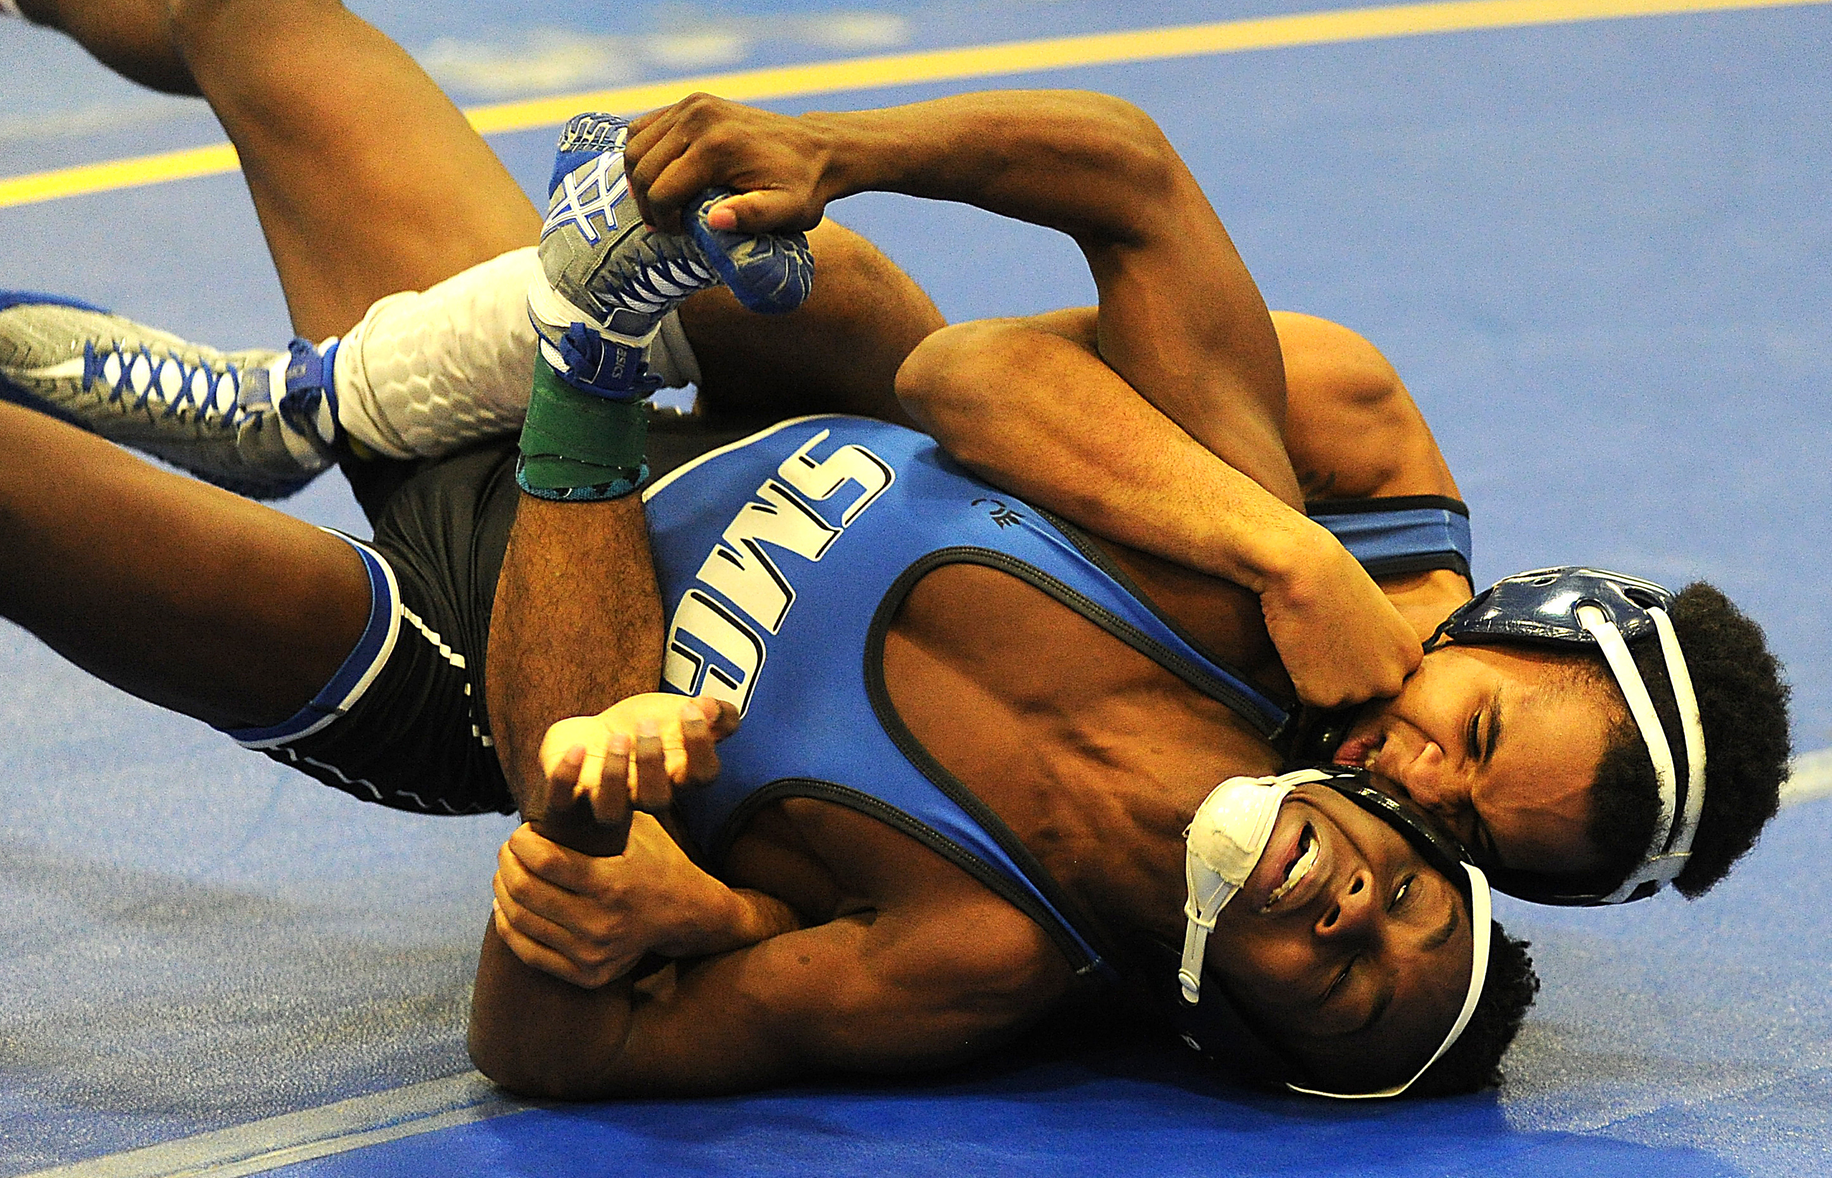 NCCC wins two dual meets